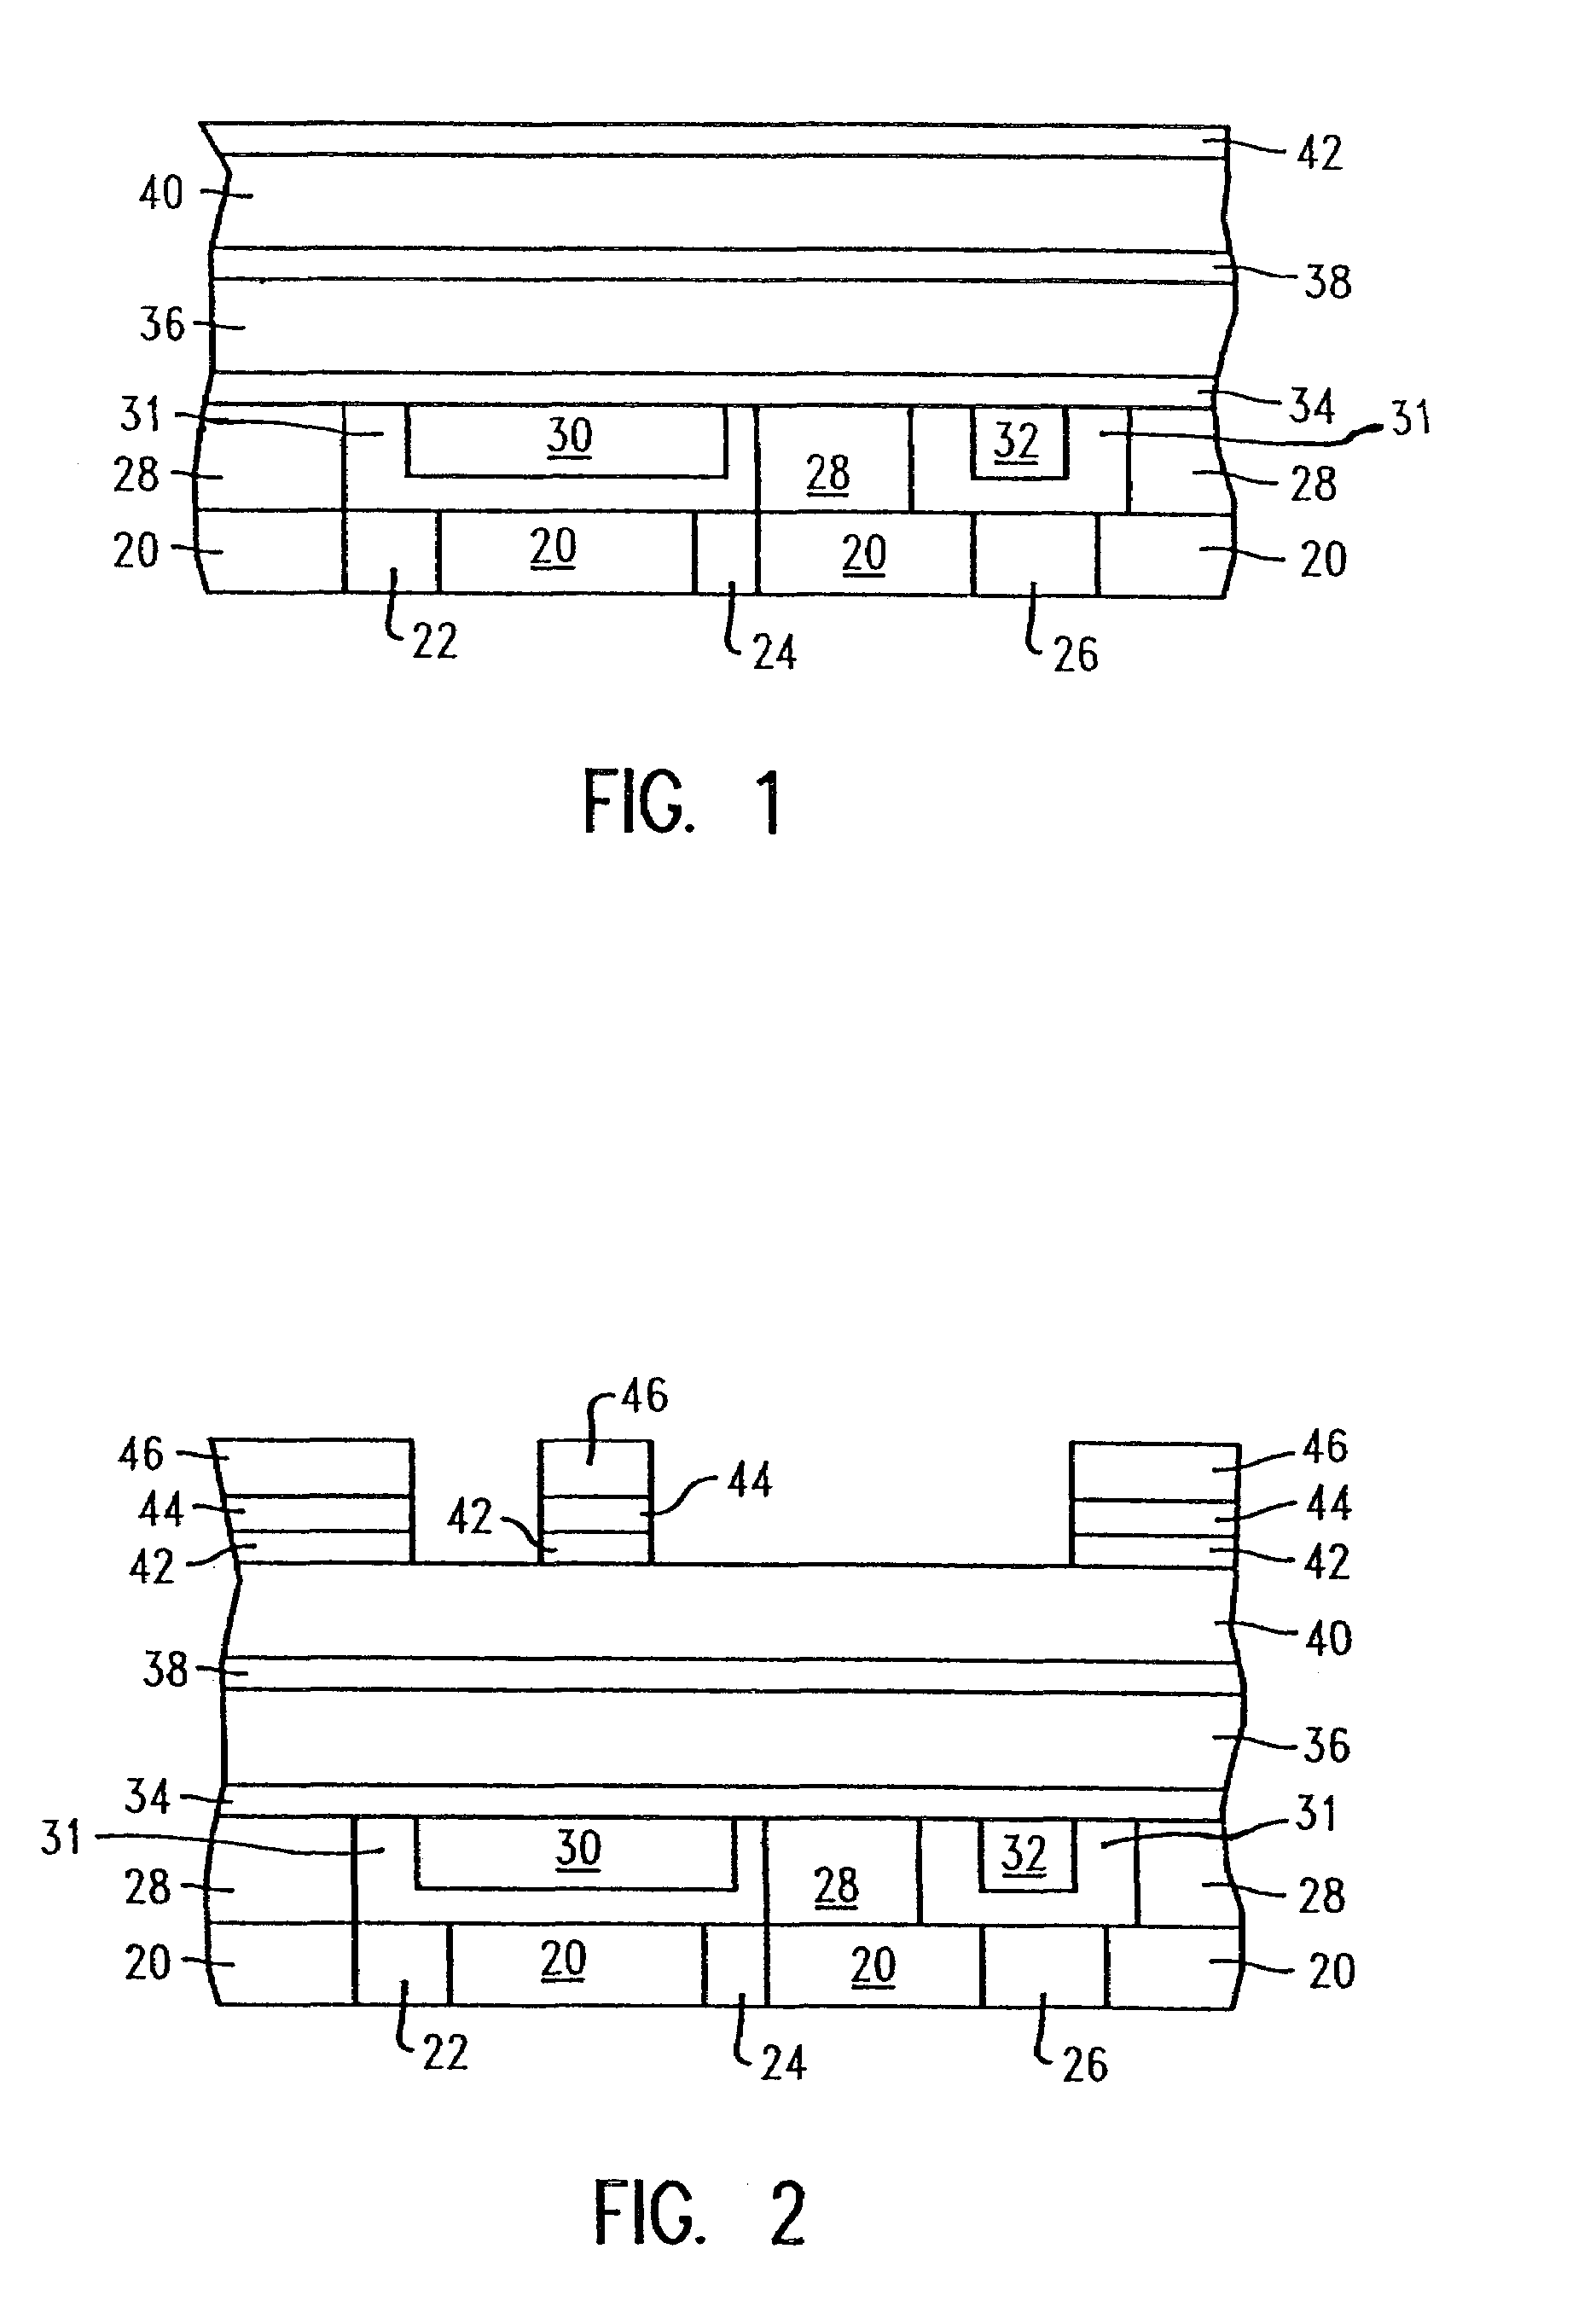 Adjustable self-aligned air gap dielectric for low capacitance wiring